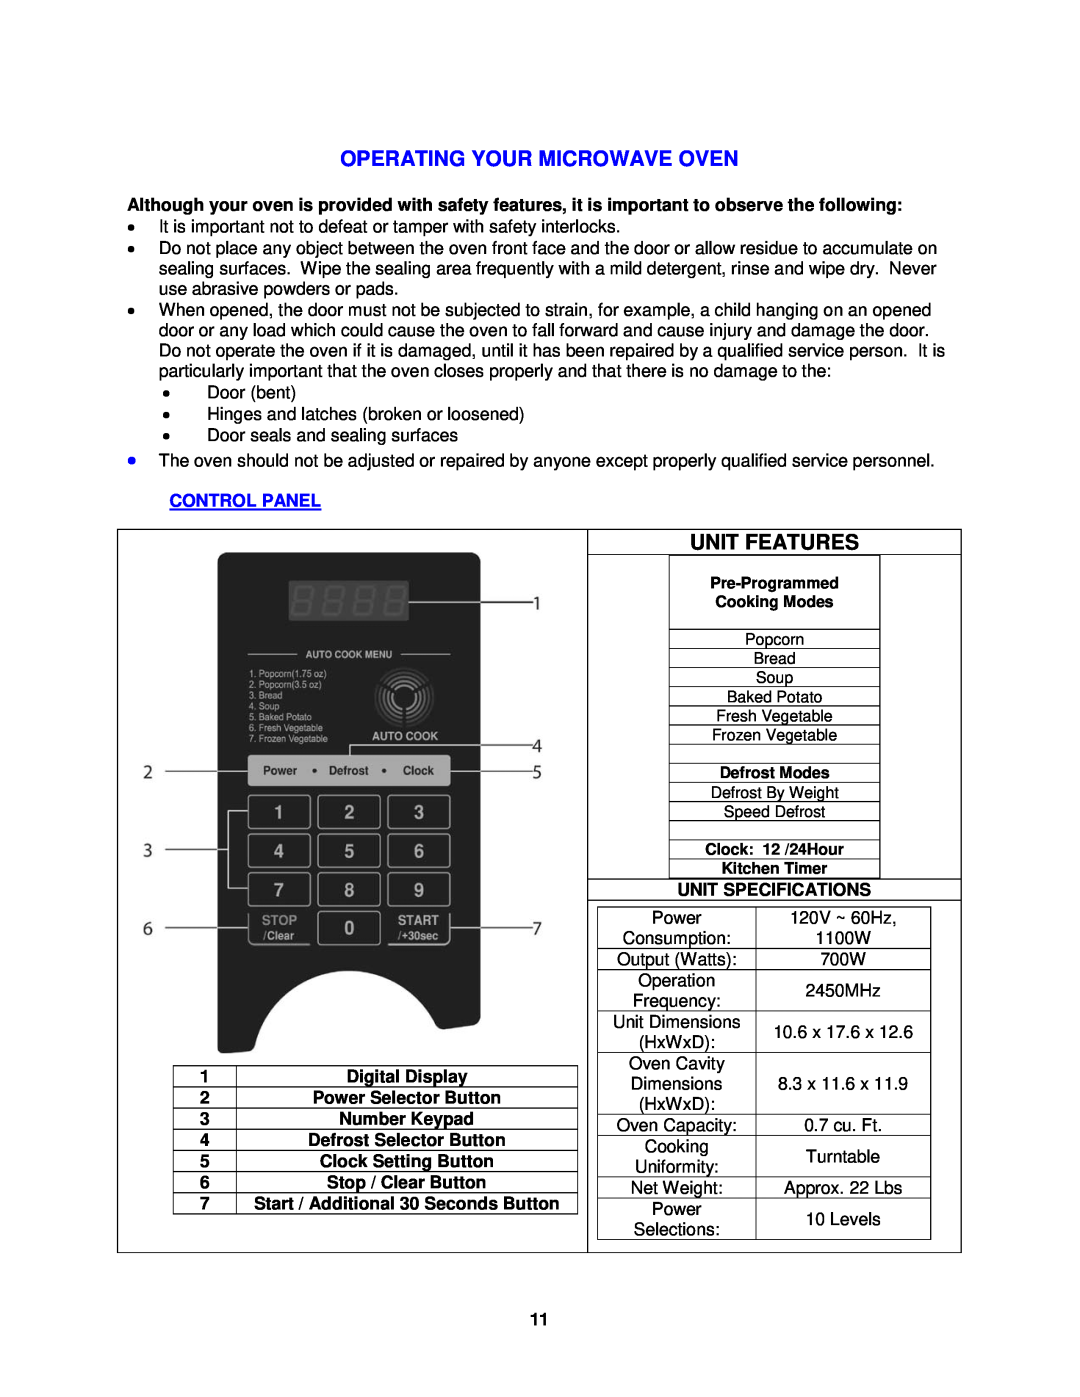 Avanti MO7212SST, MO7200TW, MO7201TB operating instructions Operating Your Microwave Oven, Unit Features, Control Panel 